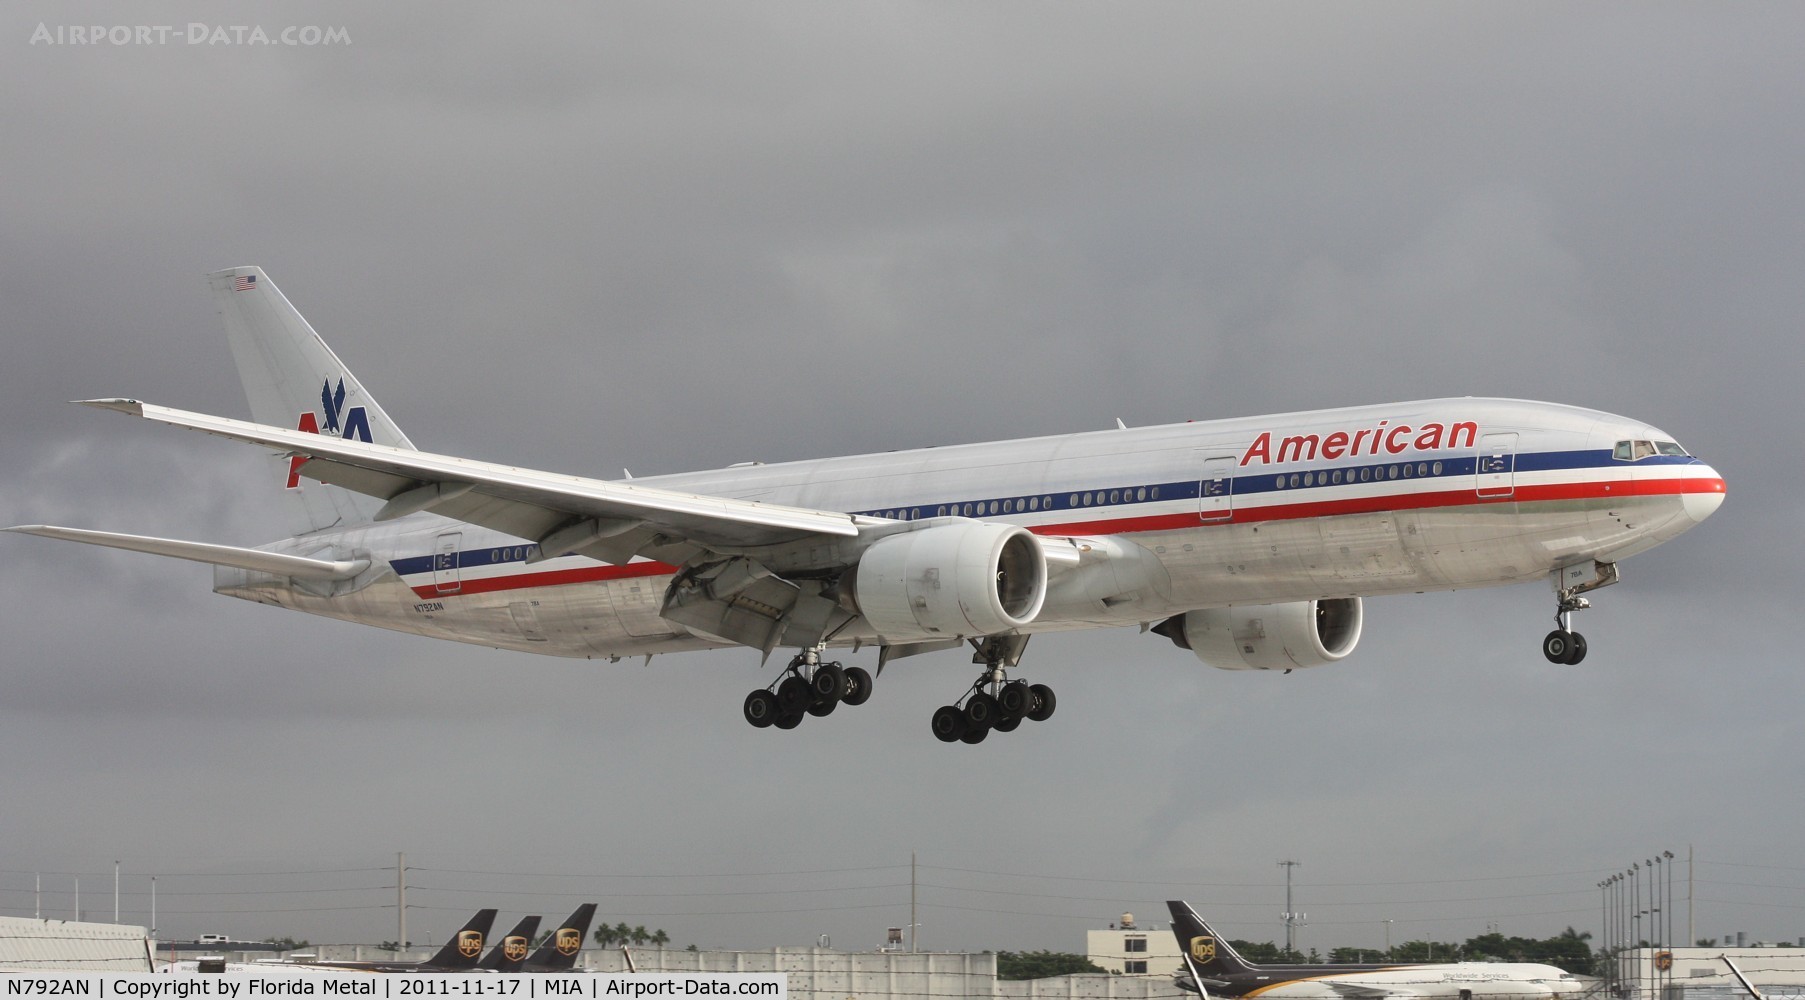 N792AN, 2000 Boeing 777-223 C/N 30253, American Triple 7 about to touch down Runway 12